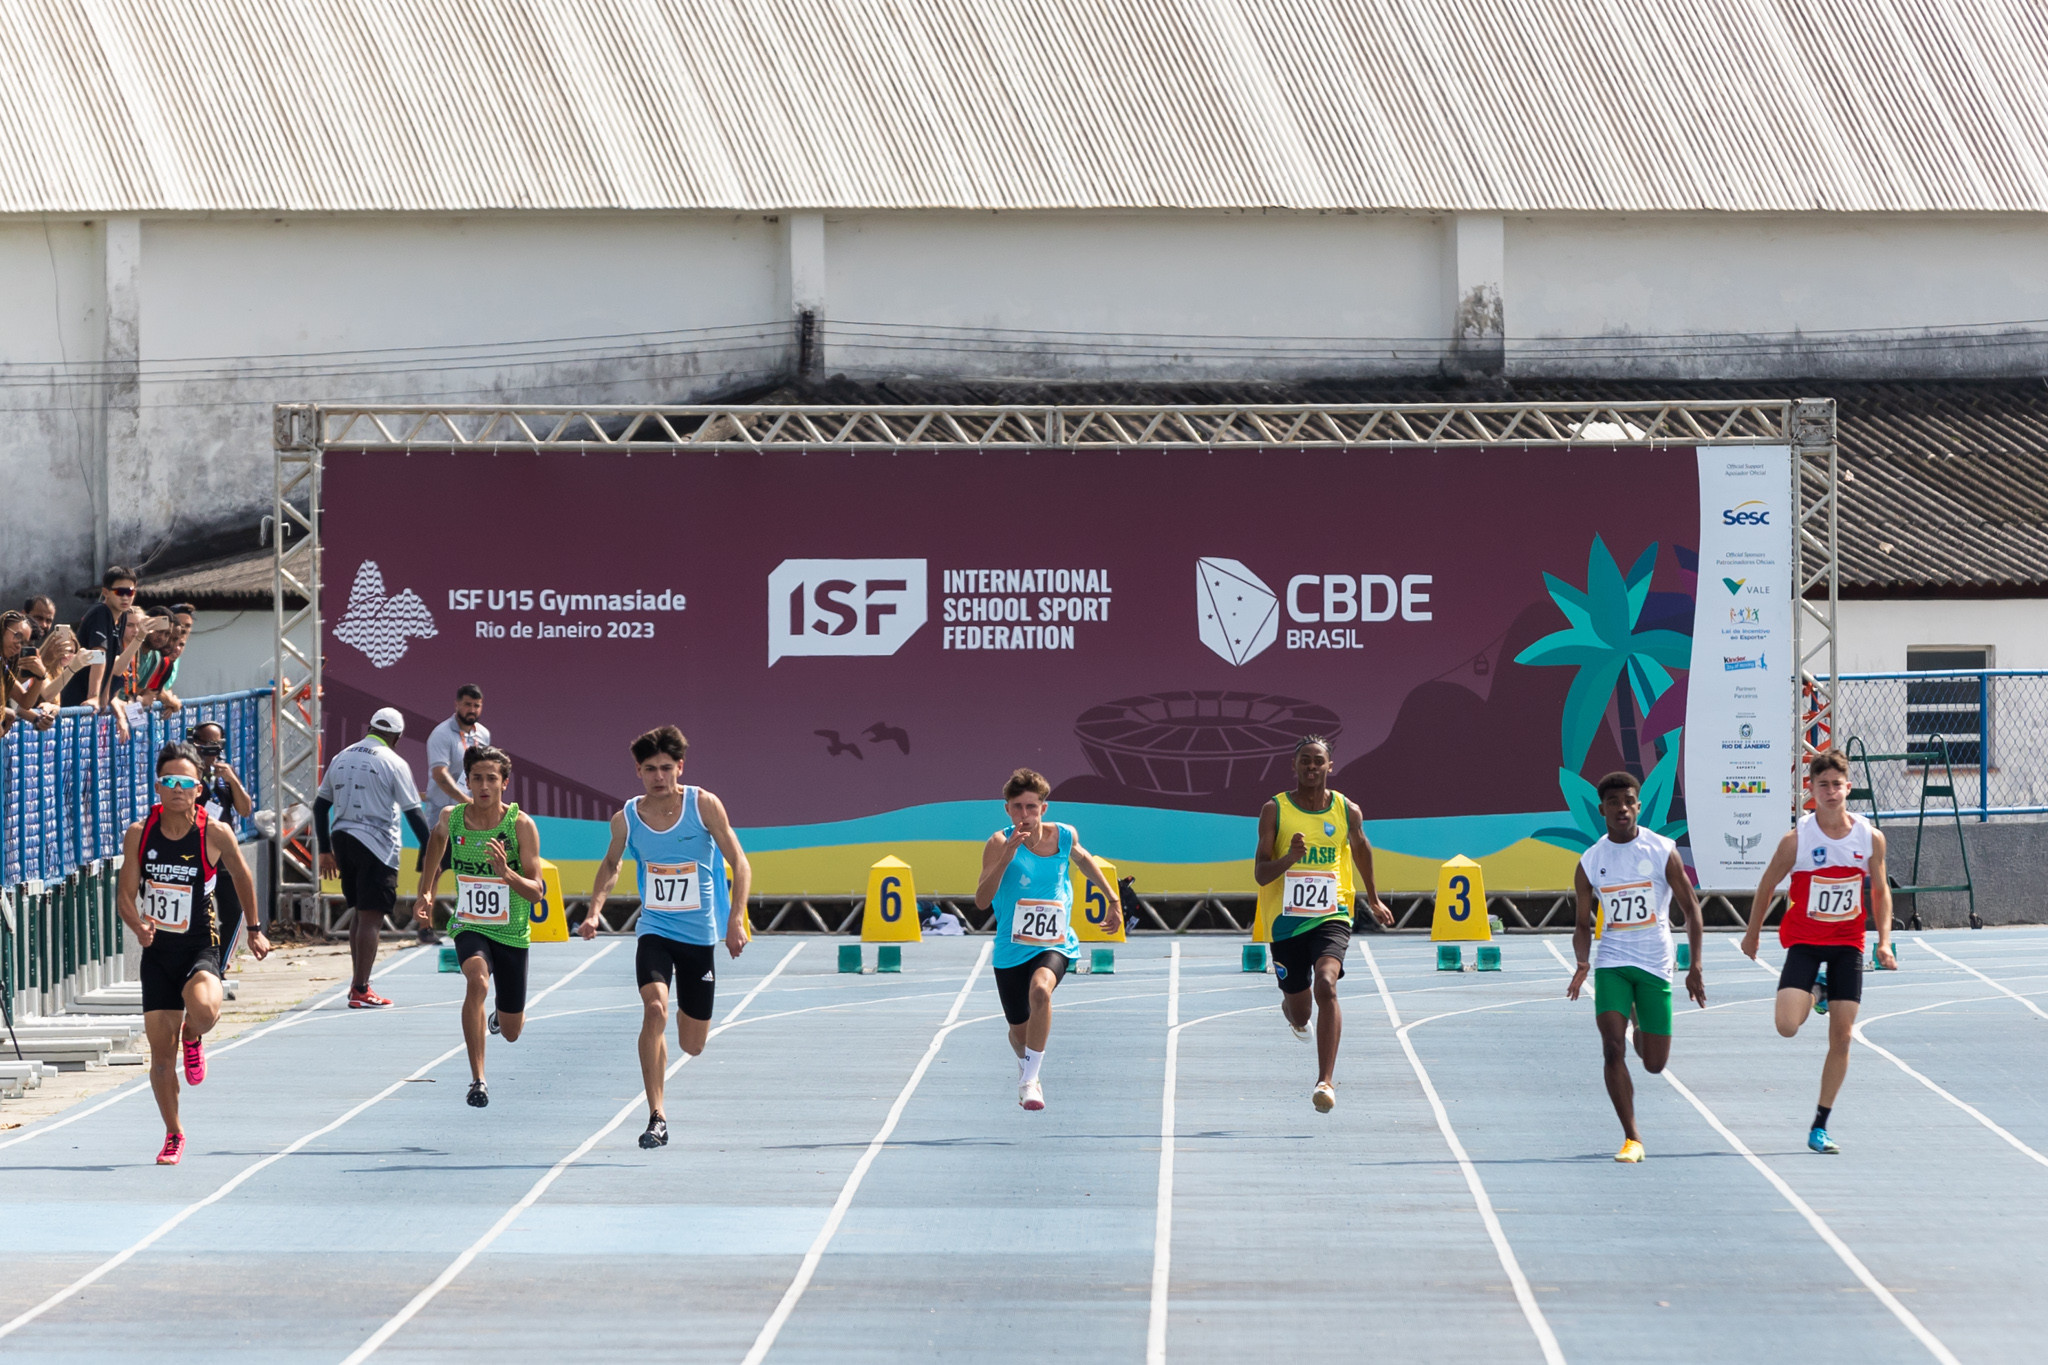 Medals were distributed in athletics events at the Olympic Park in Rio de Janeiro ©ISF